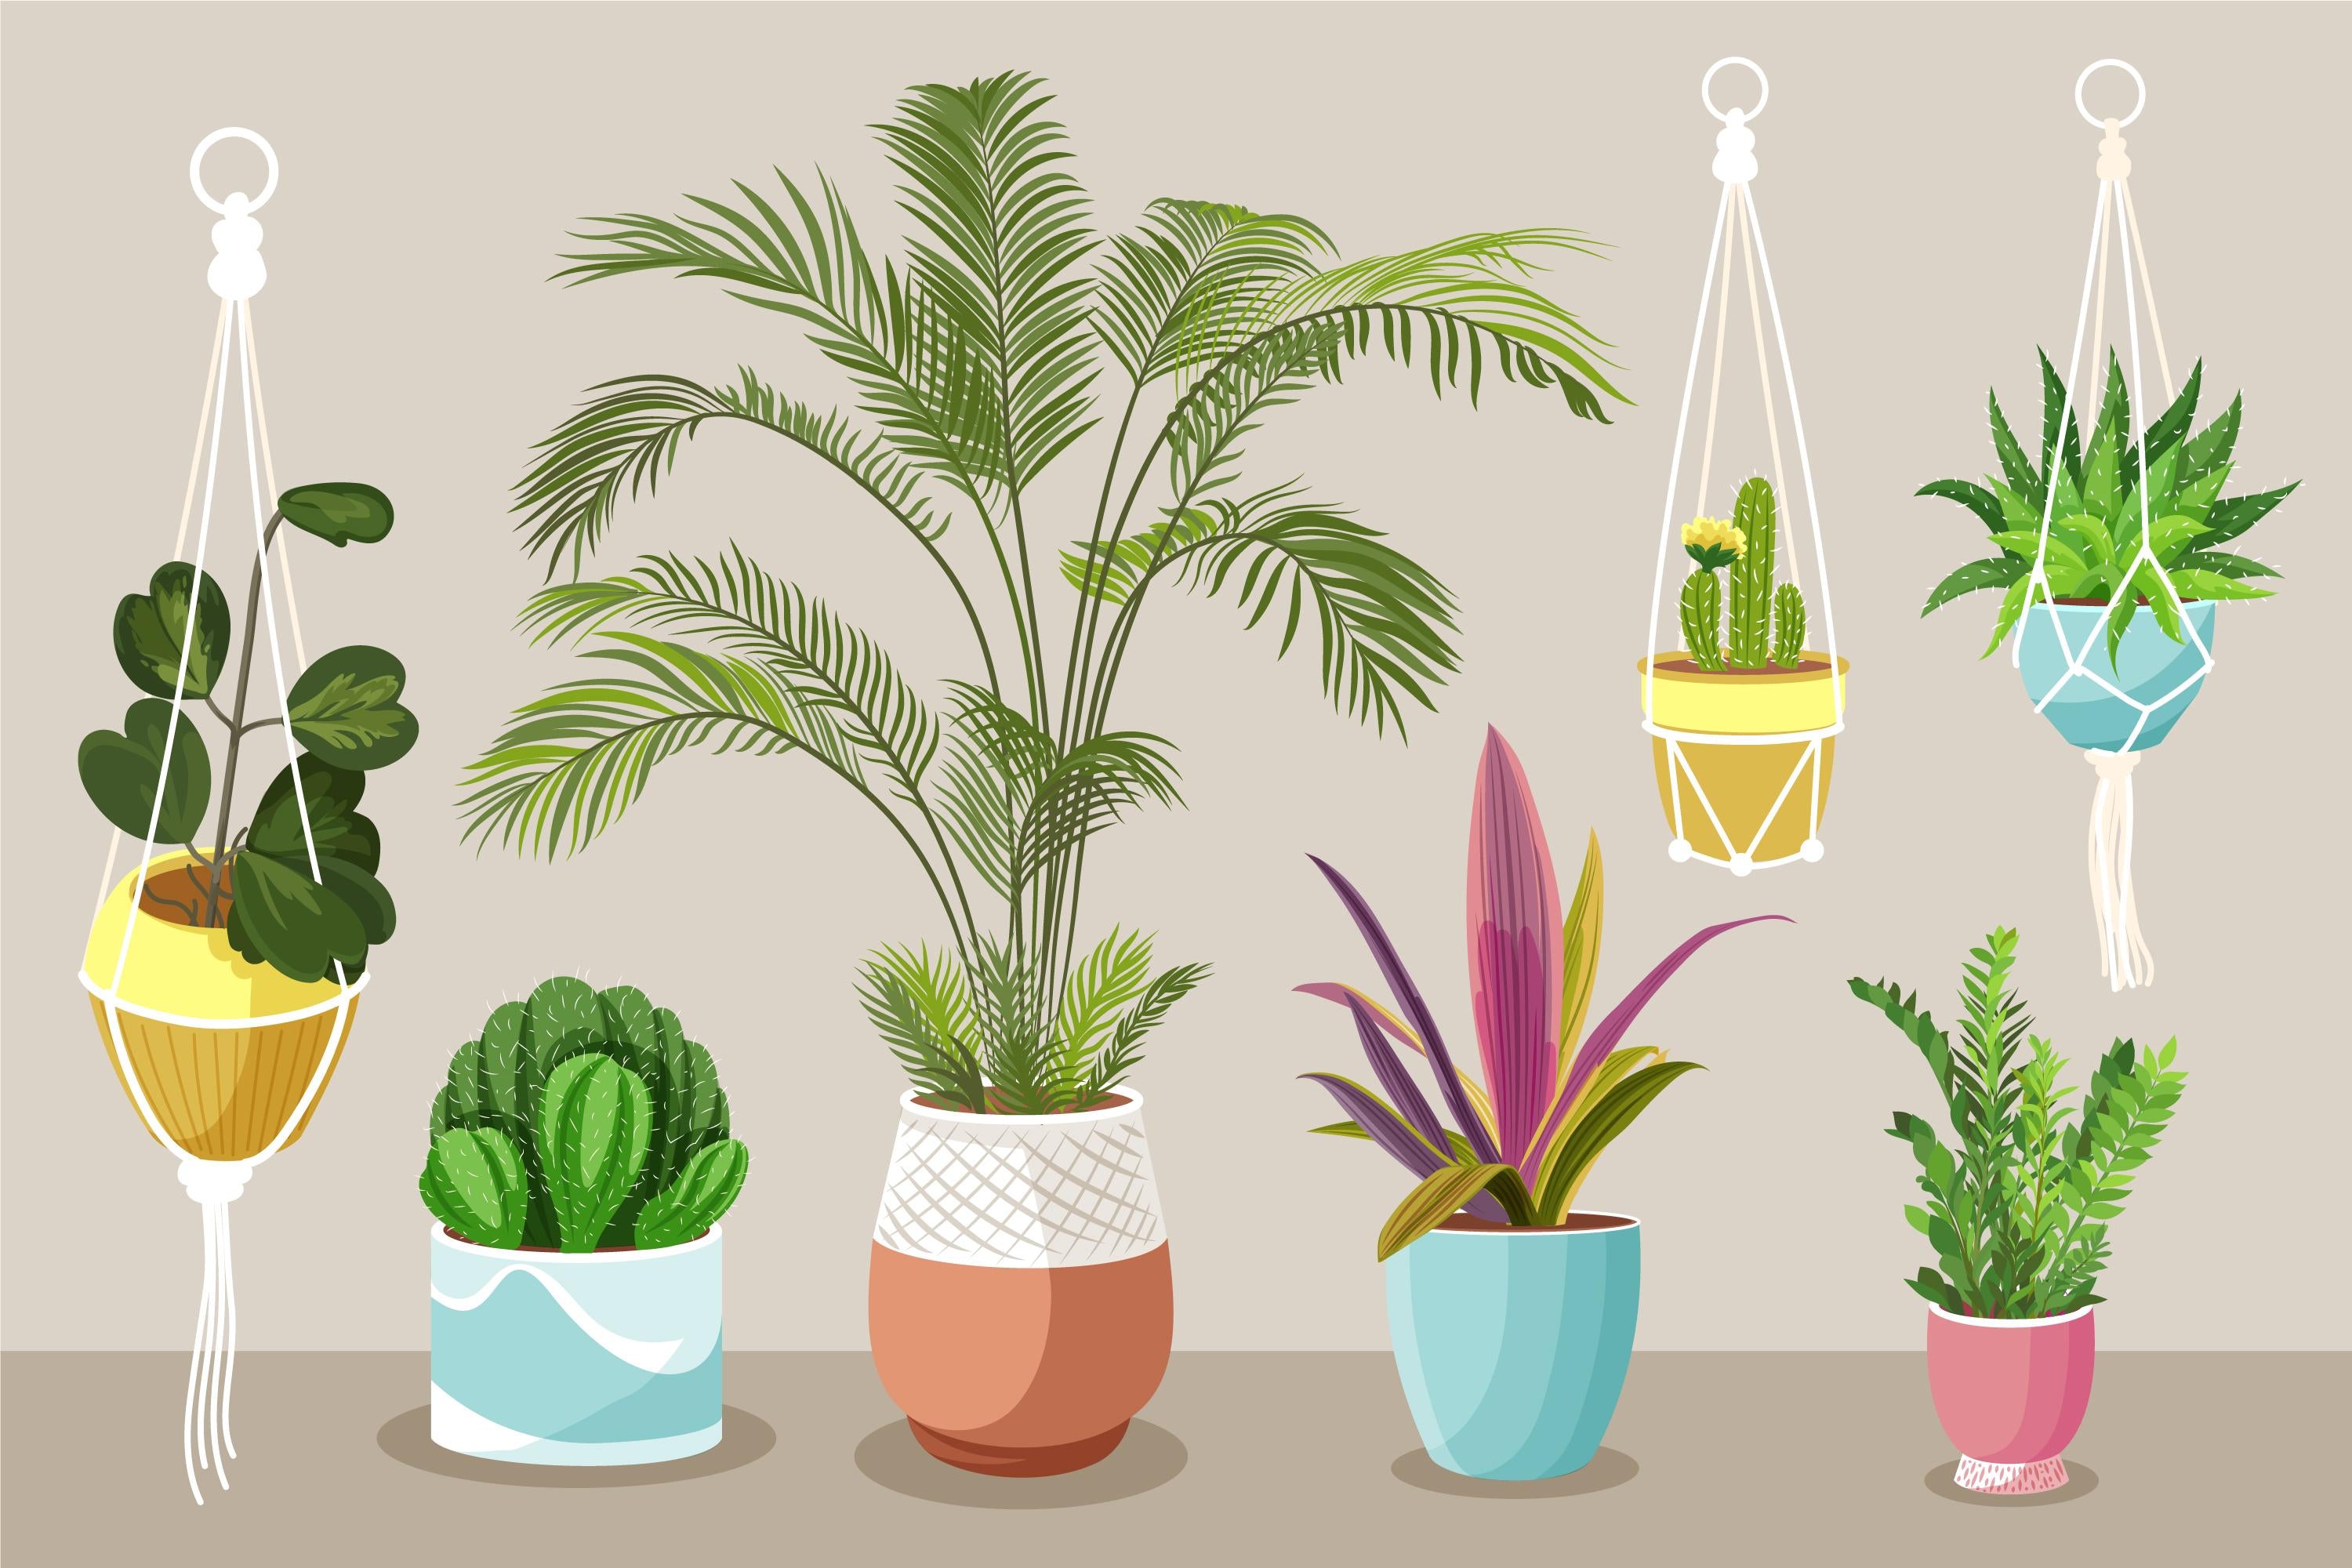 Gifts for plant lovers: 25 of the best plant gifts to buy in 2022